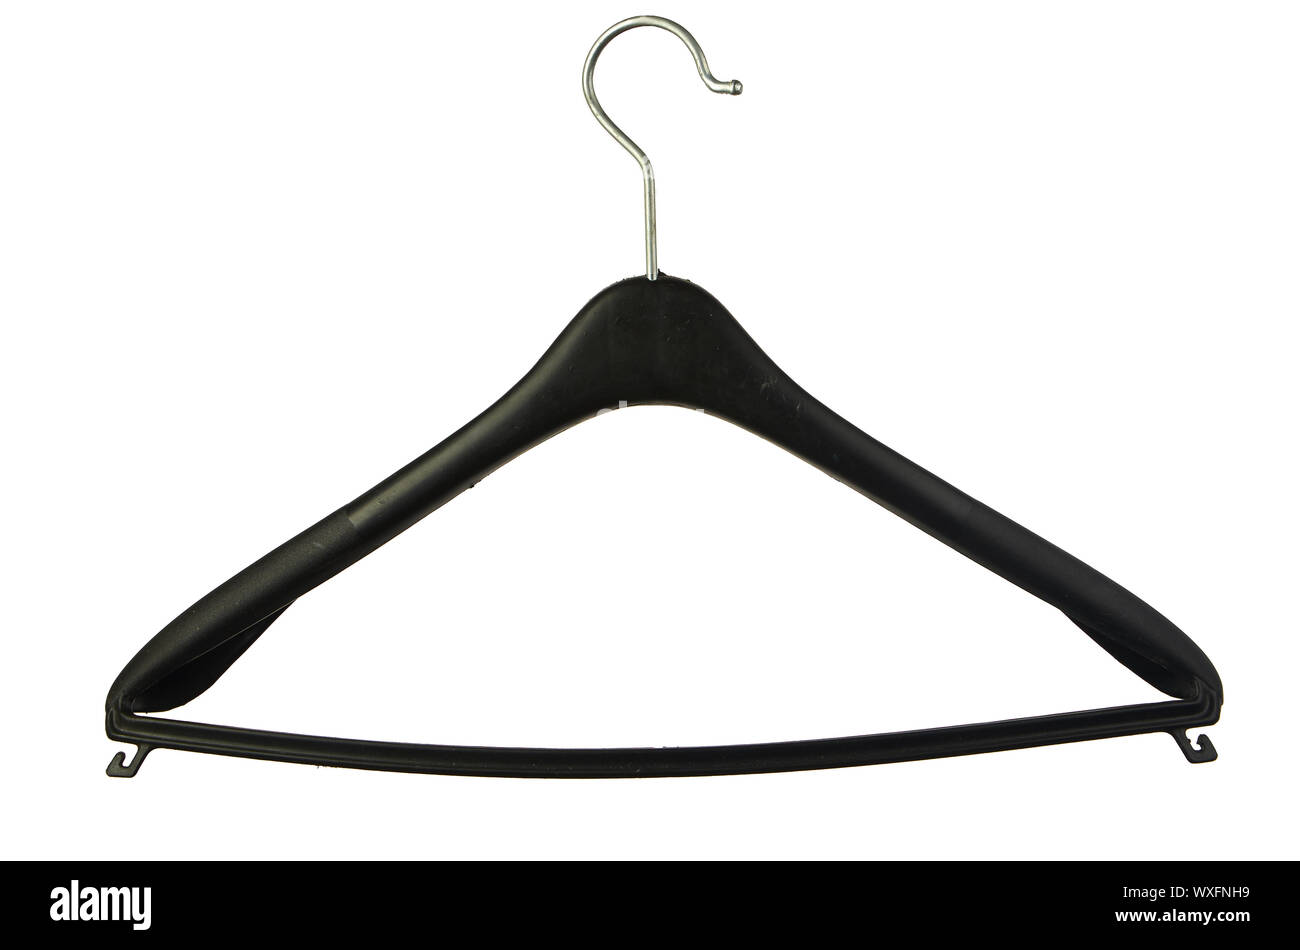 Suit Coat Hanger High Resolution Stock Photography and Images - Alamy